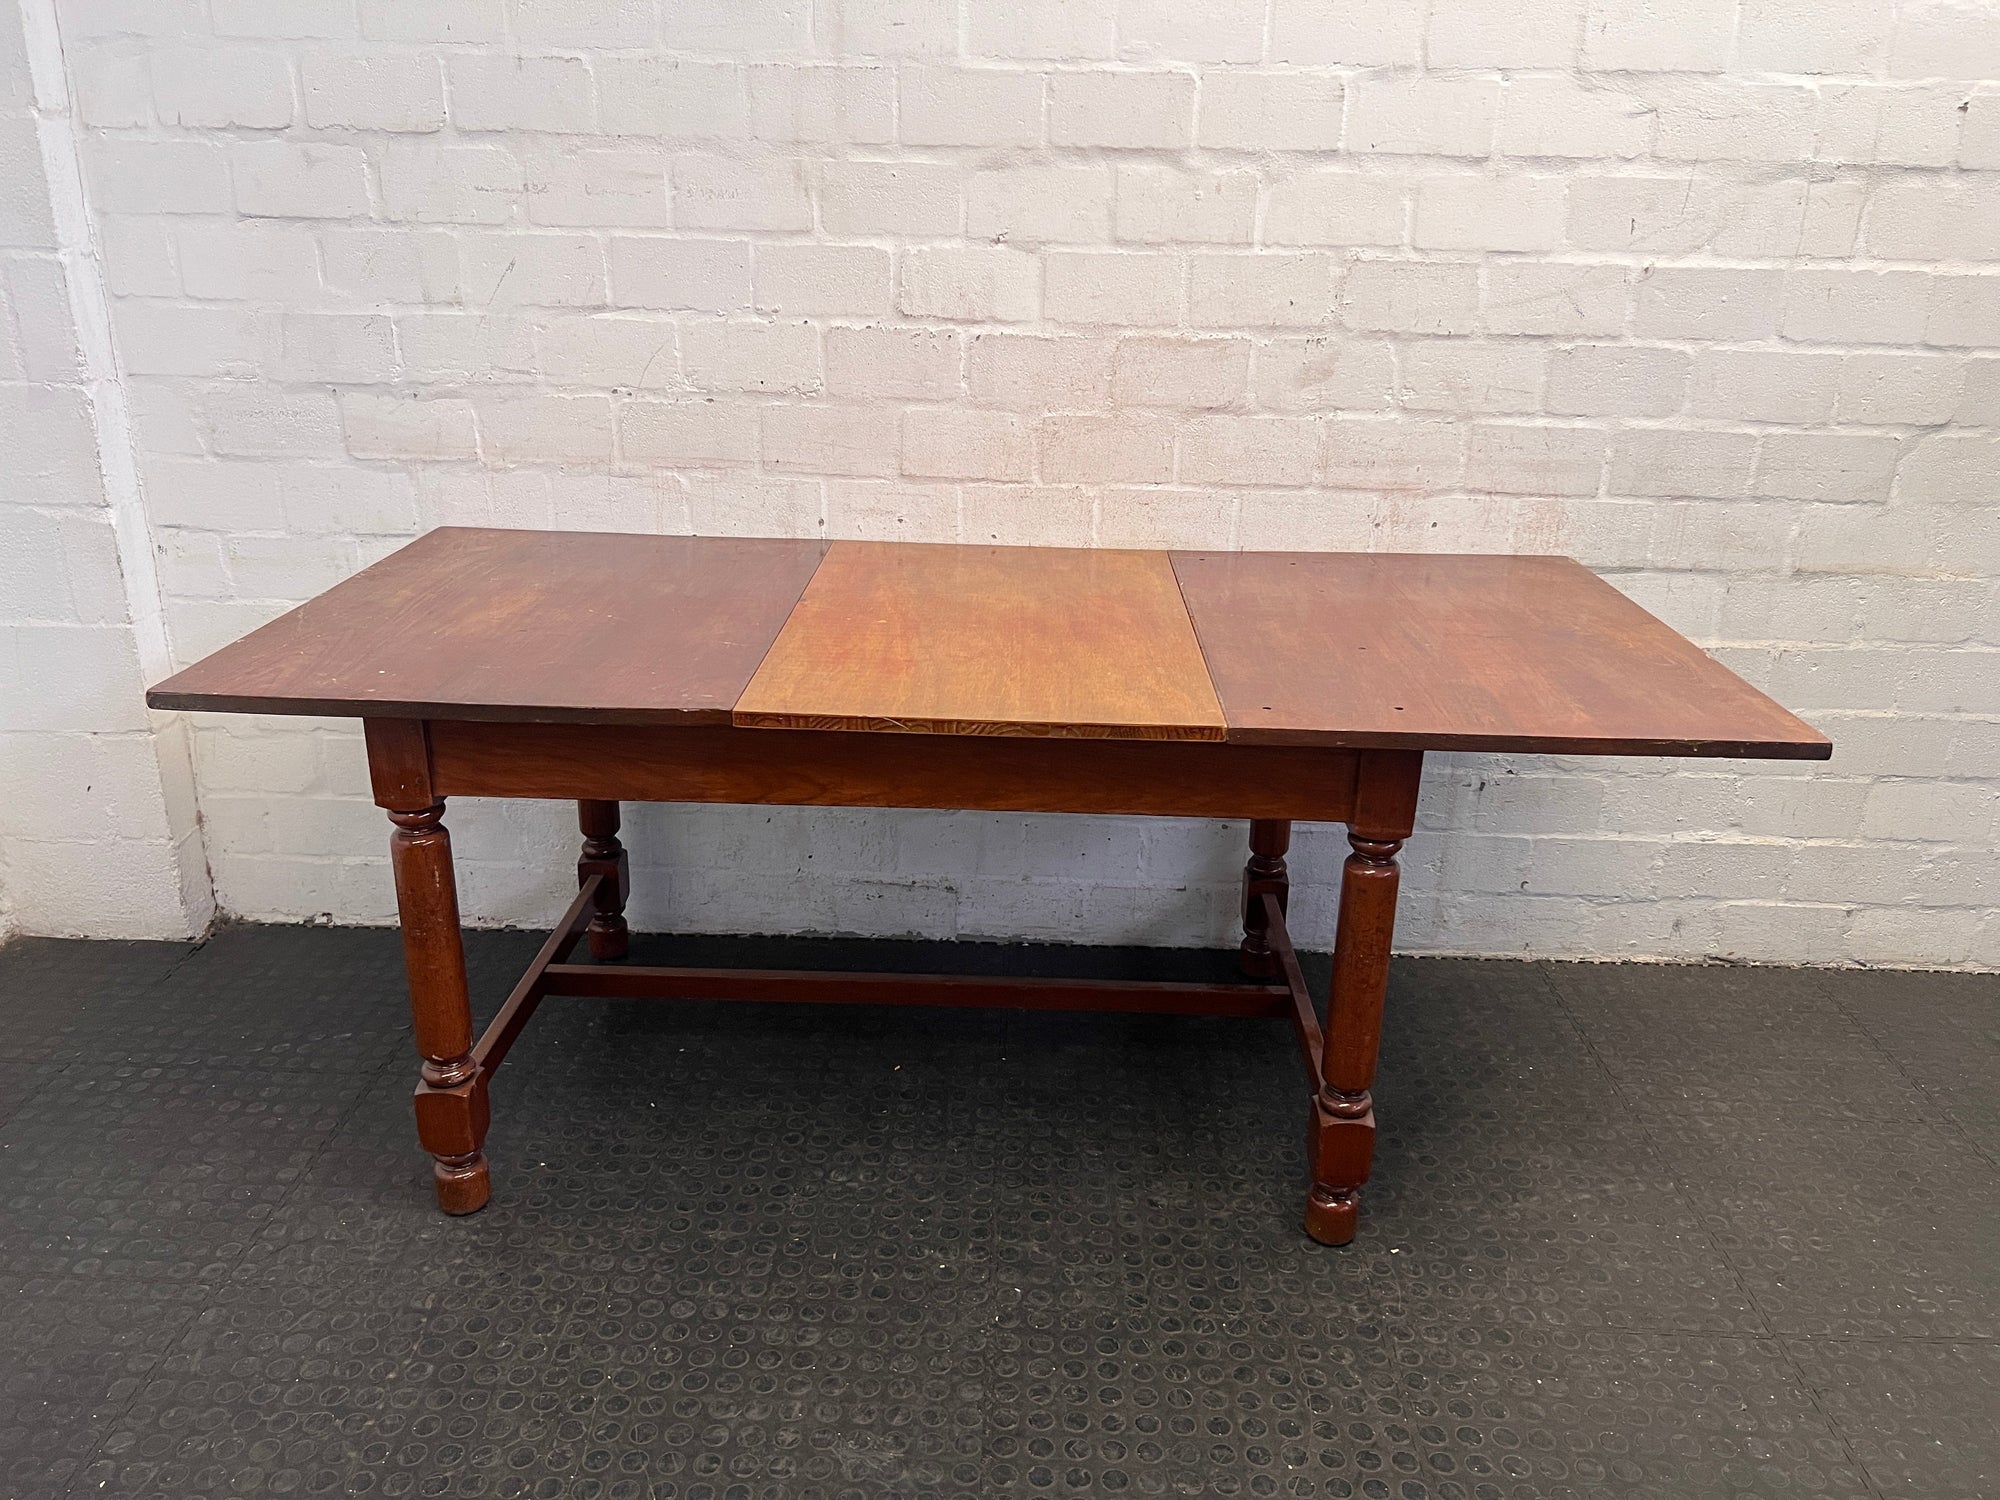 Wooden Eight Seater Extending Dining Room Table